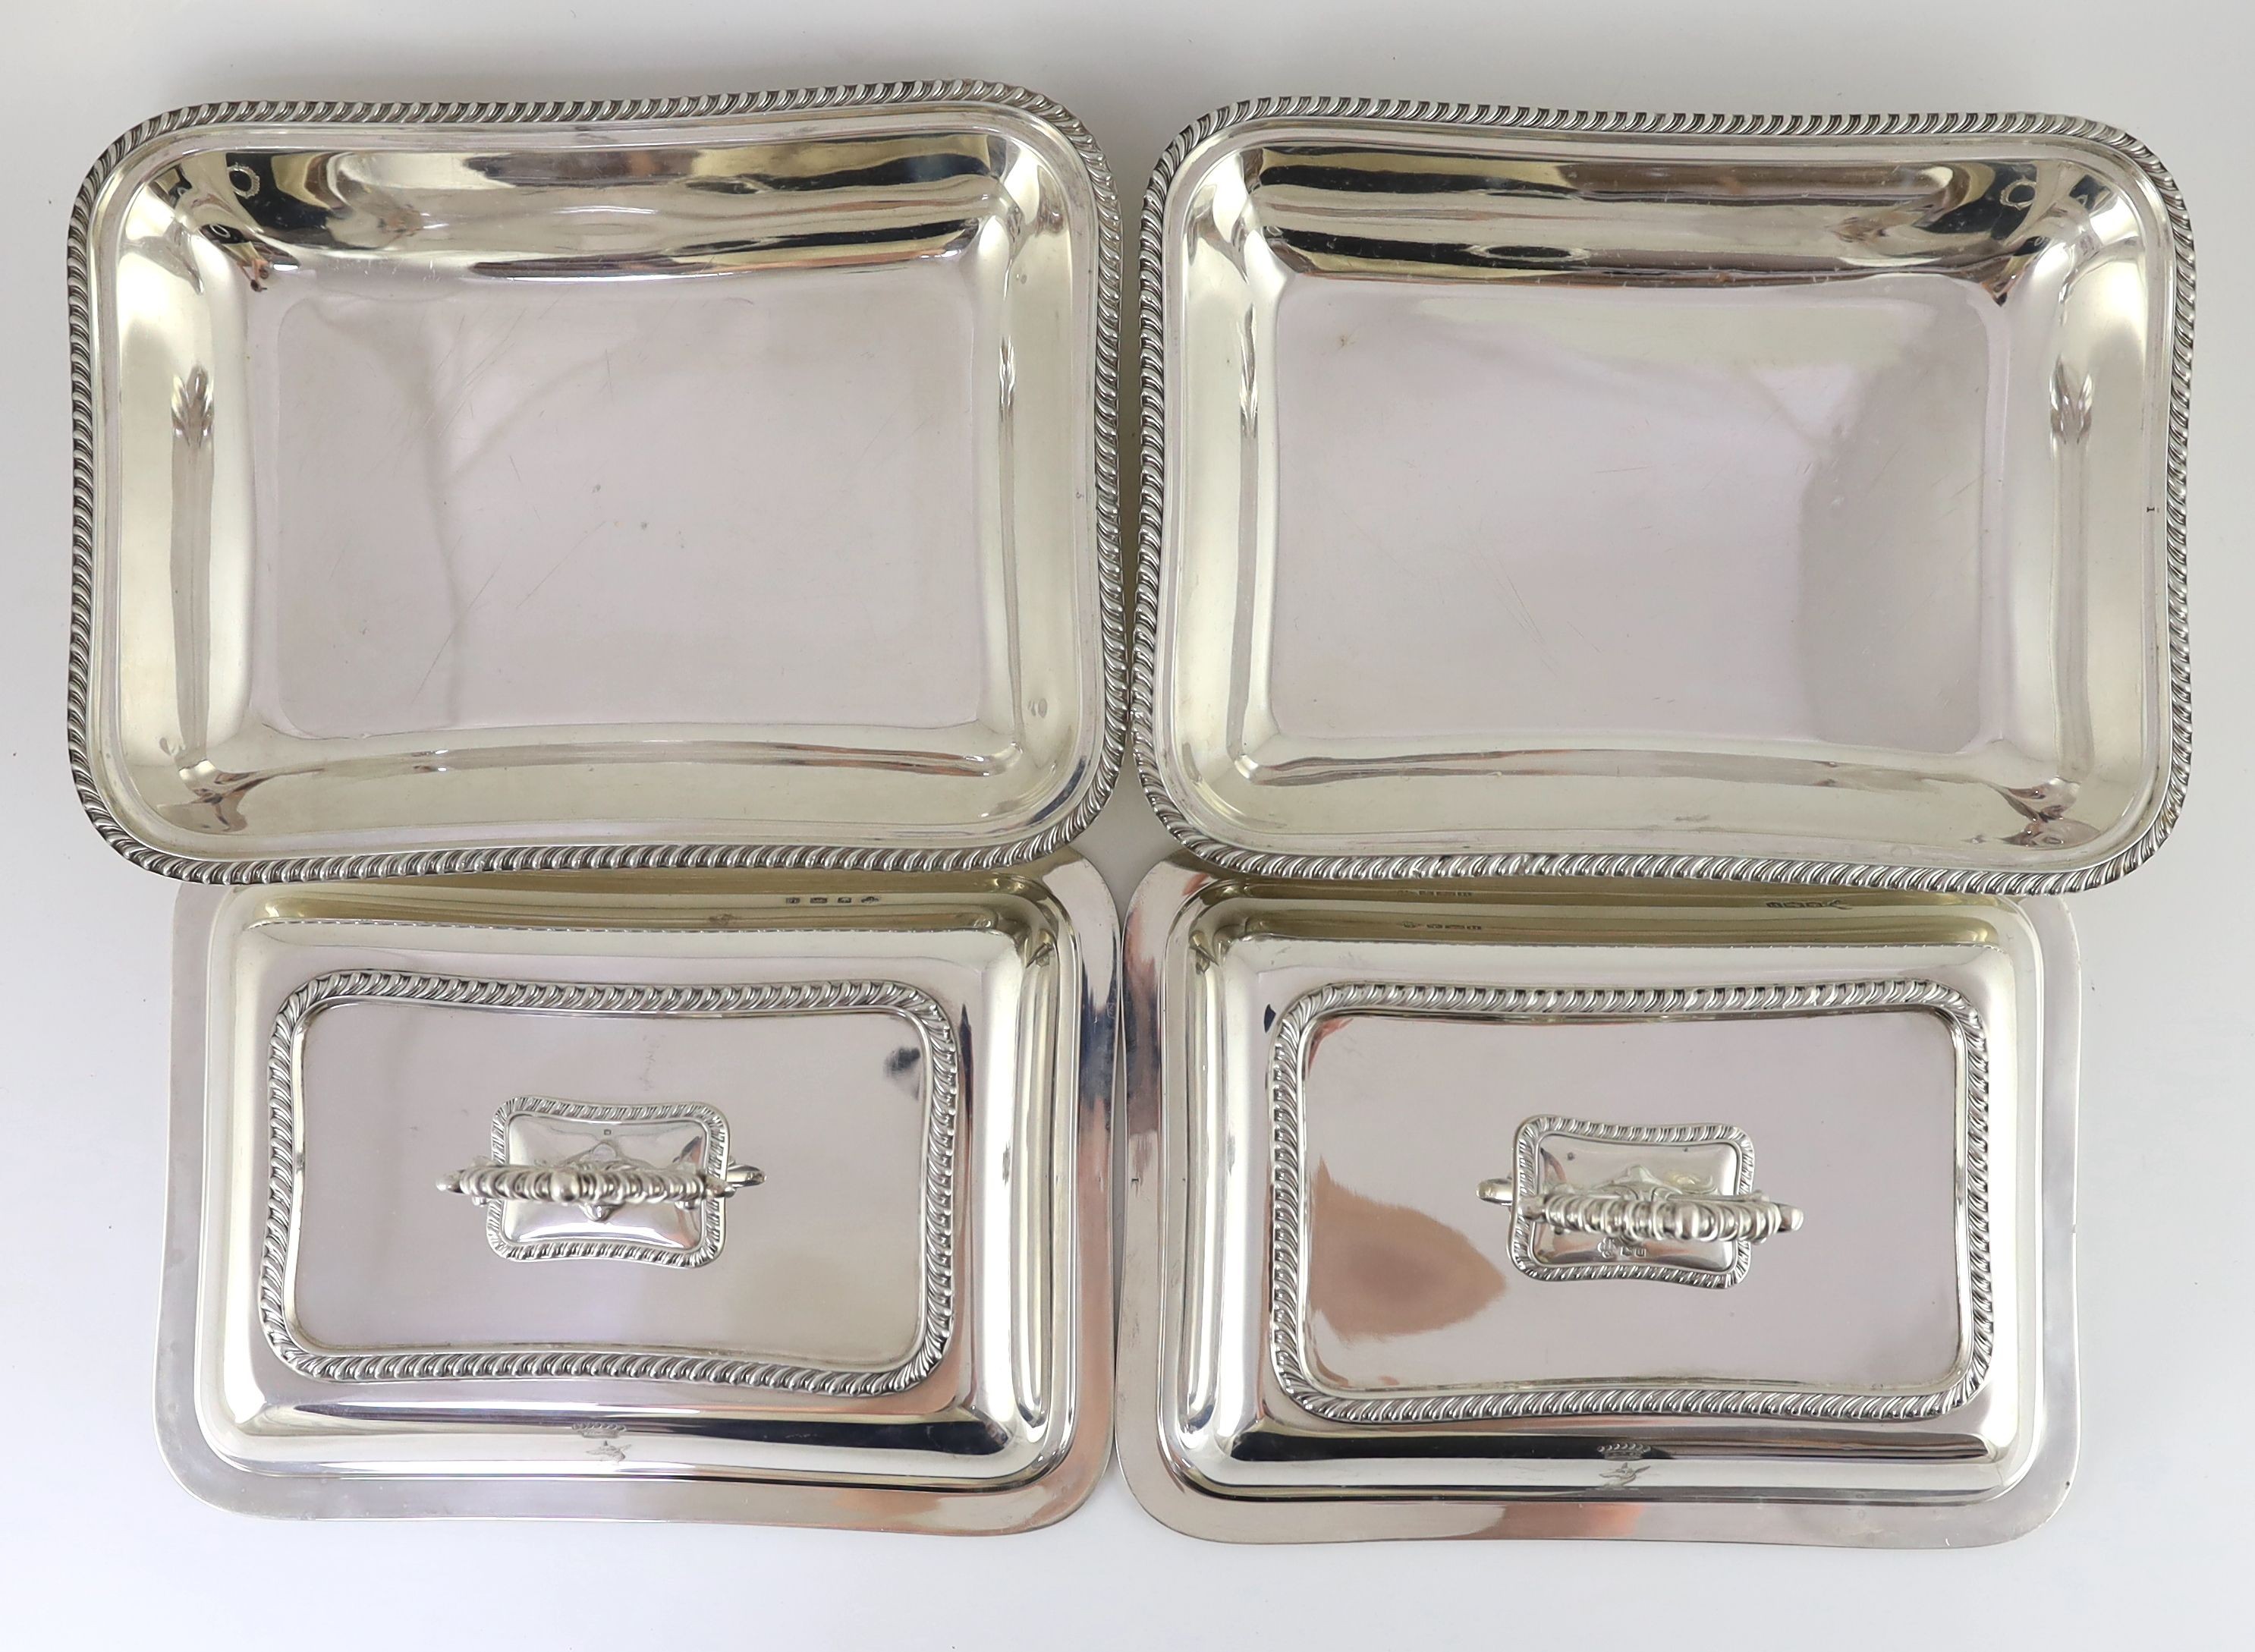 A pair of George V silver tureens and covers with handles, by Jay, Richard Attenborough Ltd